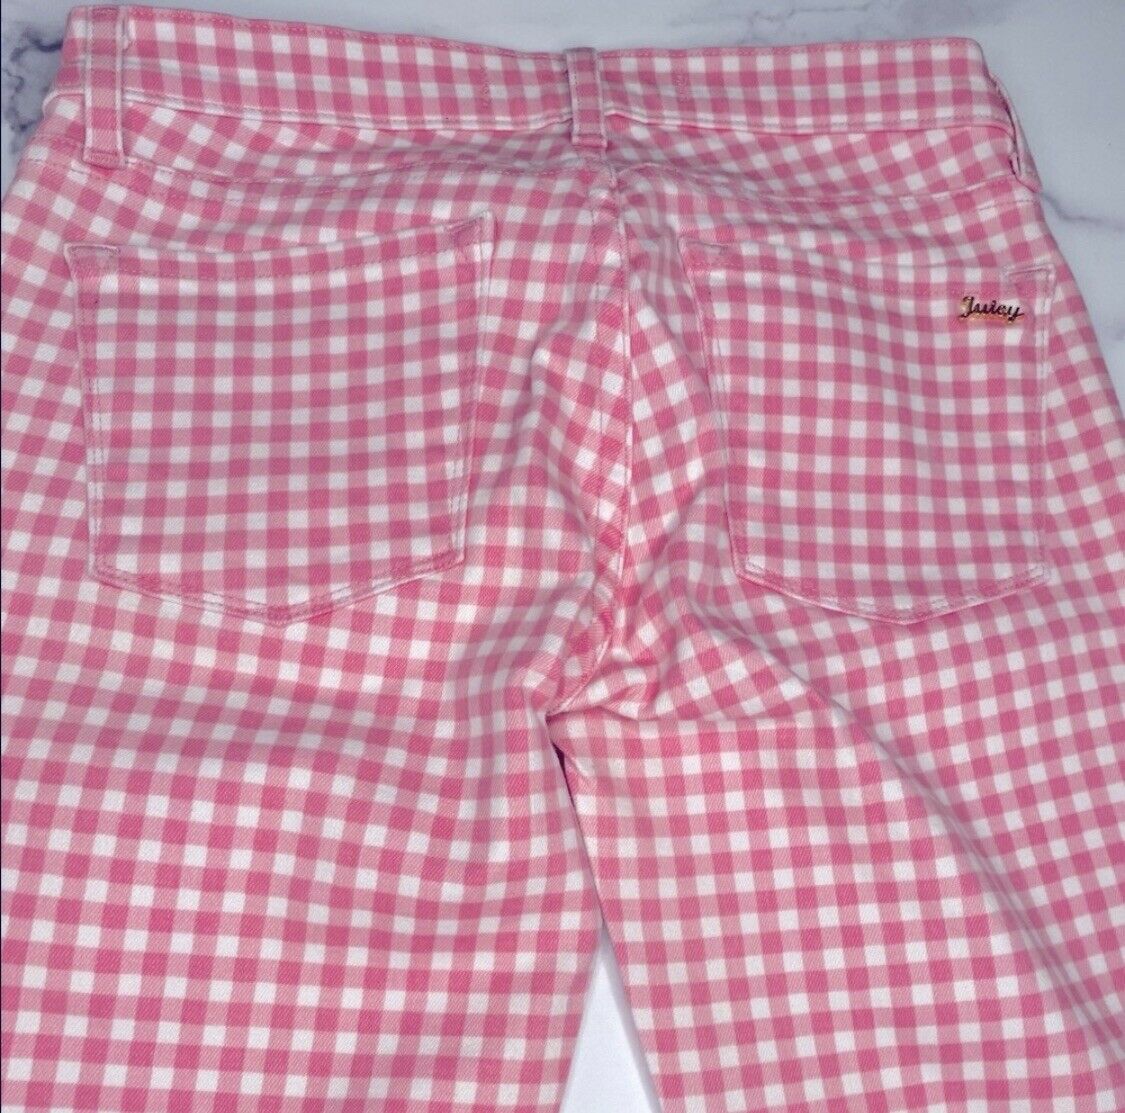 Authentic Juicy Couture Pink Striped Denim  Pants size 24